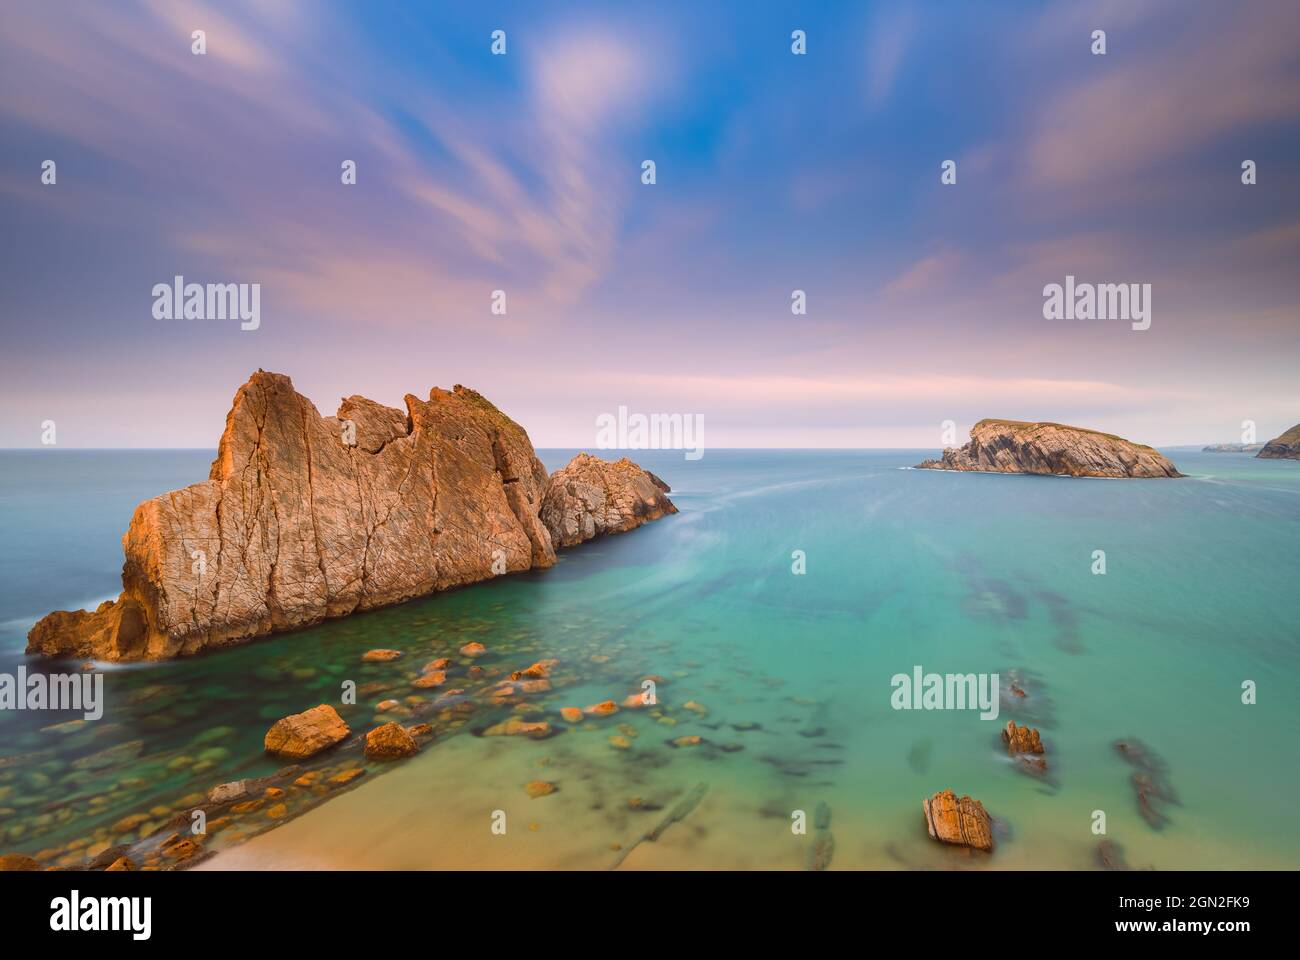 SPAIN, CANTABRIA, LIENCRES. VIEW FROM ABOVE OF ARNIA BEACH WITH ITS CUT ROCKS AND TURQUOISE WATER AT SUNSET Stock Photo